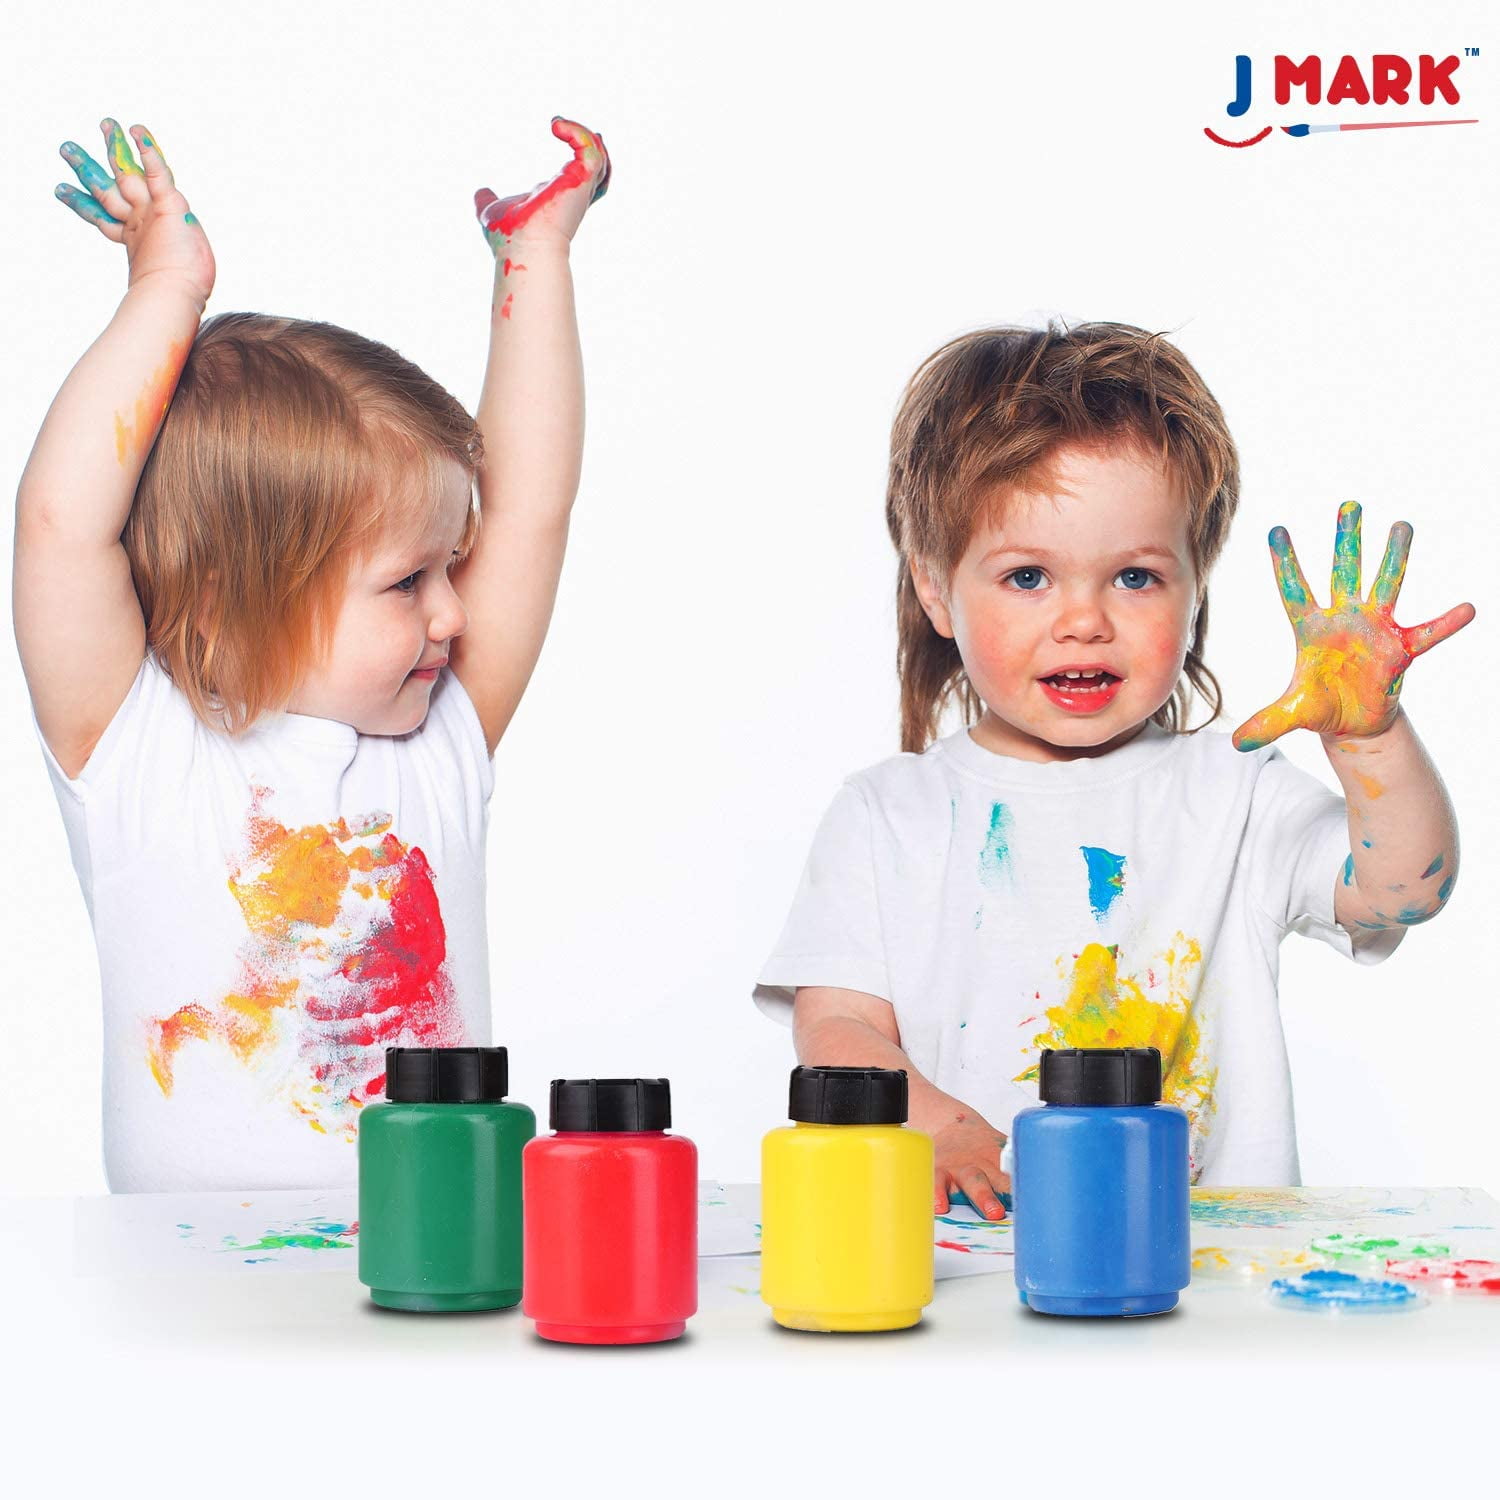 J MARK Washable Finger Paint for Toddlers 1-3 – Set Includes 50